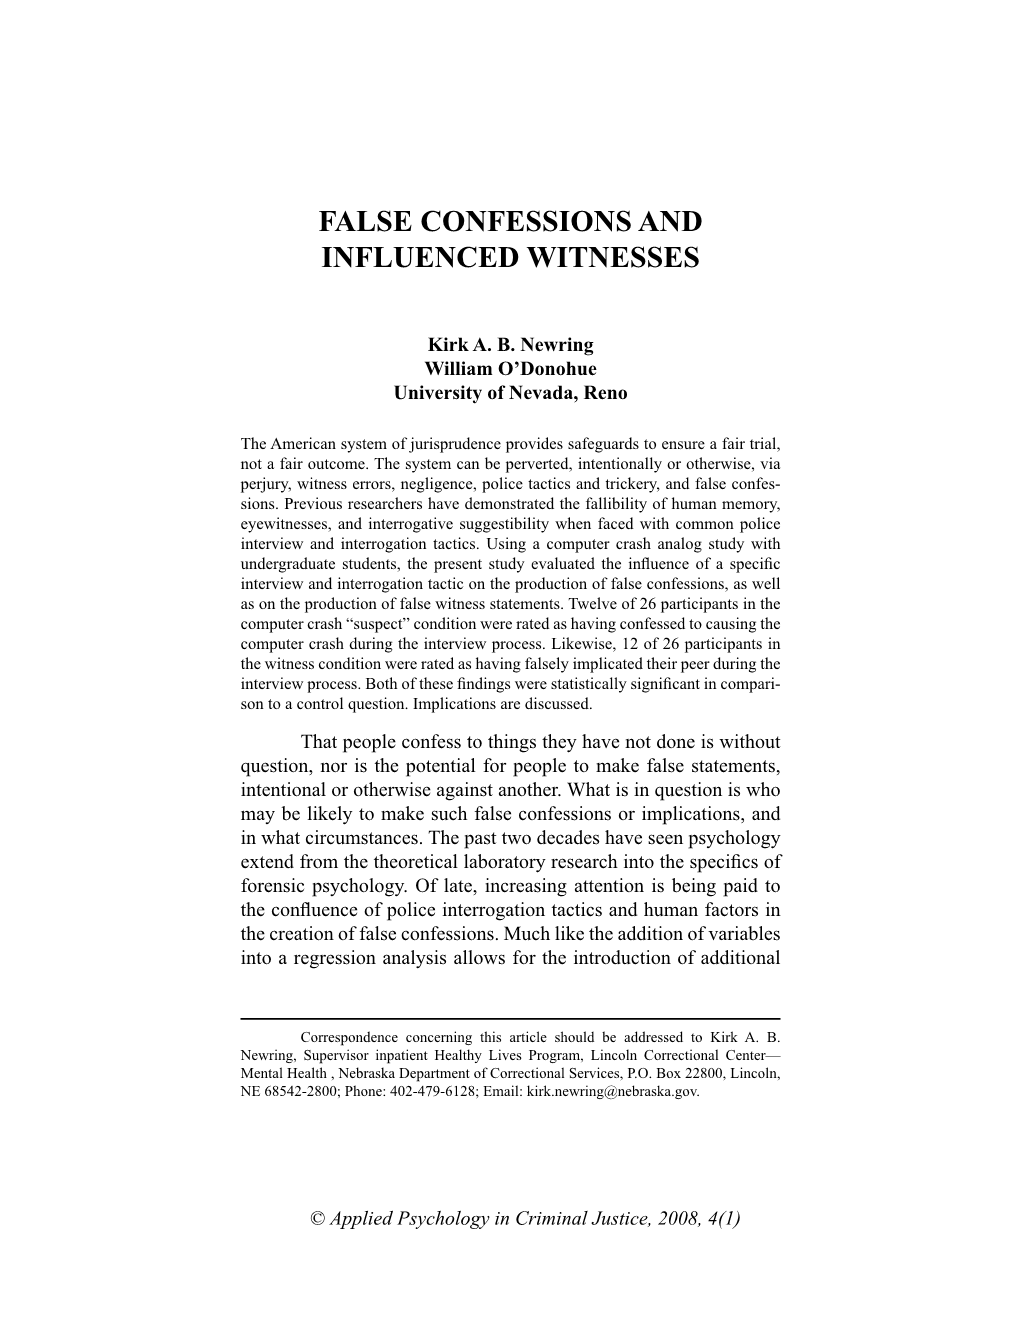 False Confessions and Influenced Witnesses